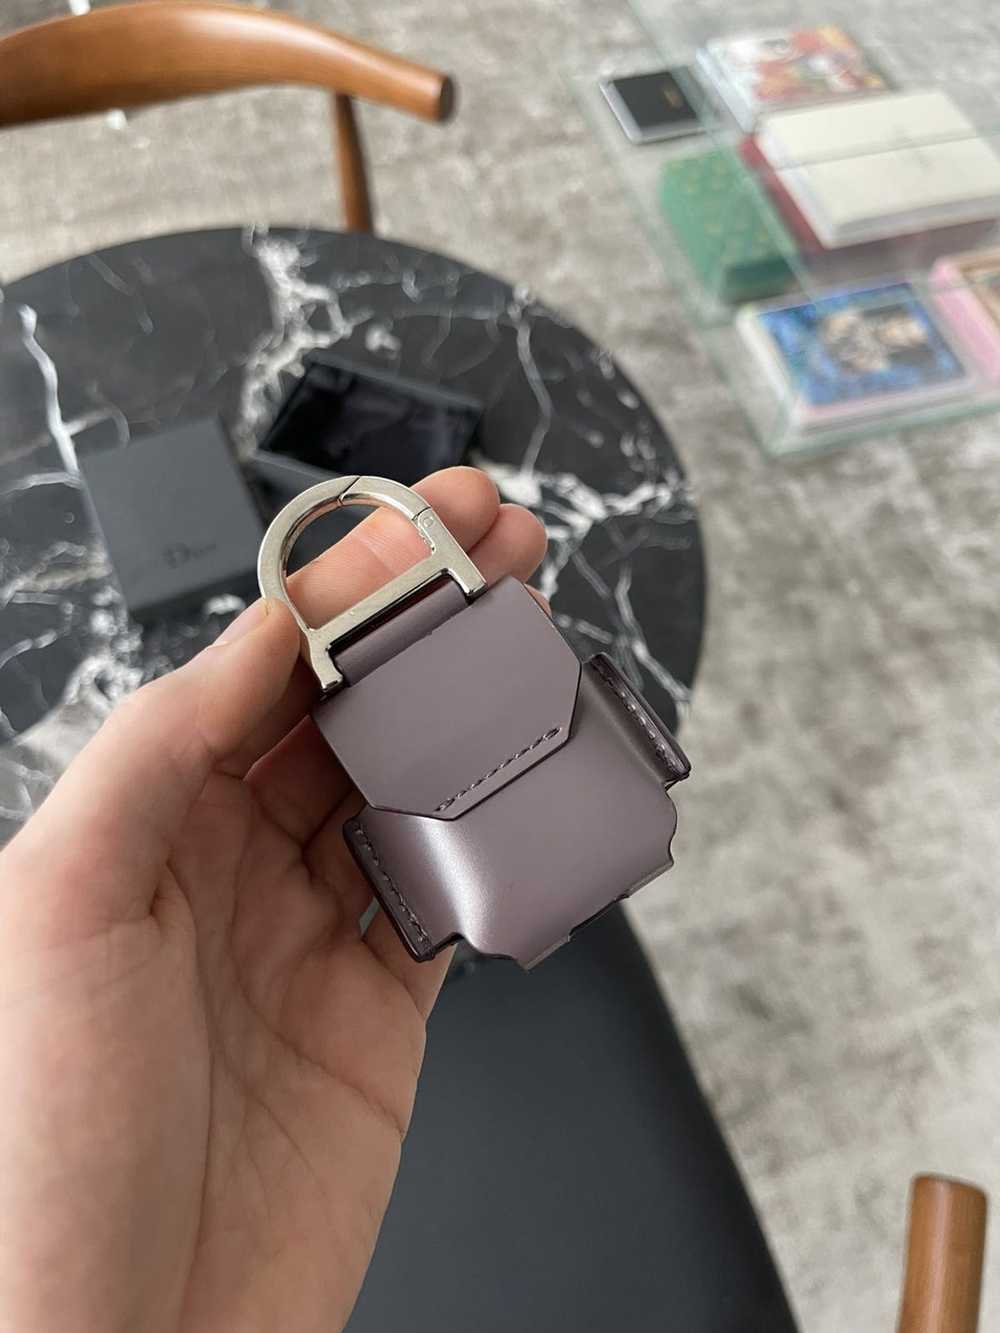 Dior Airpods Pro Case - Airpods 1/2 And 3th Gen - HypedEffect